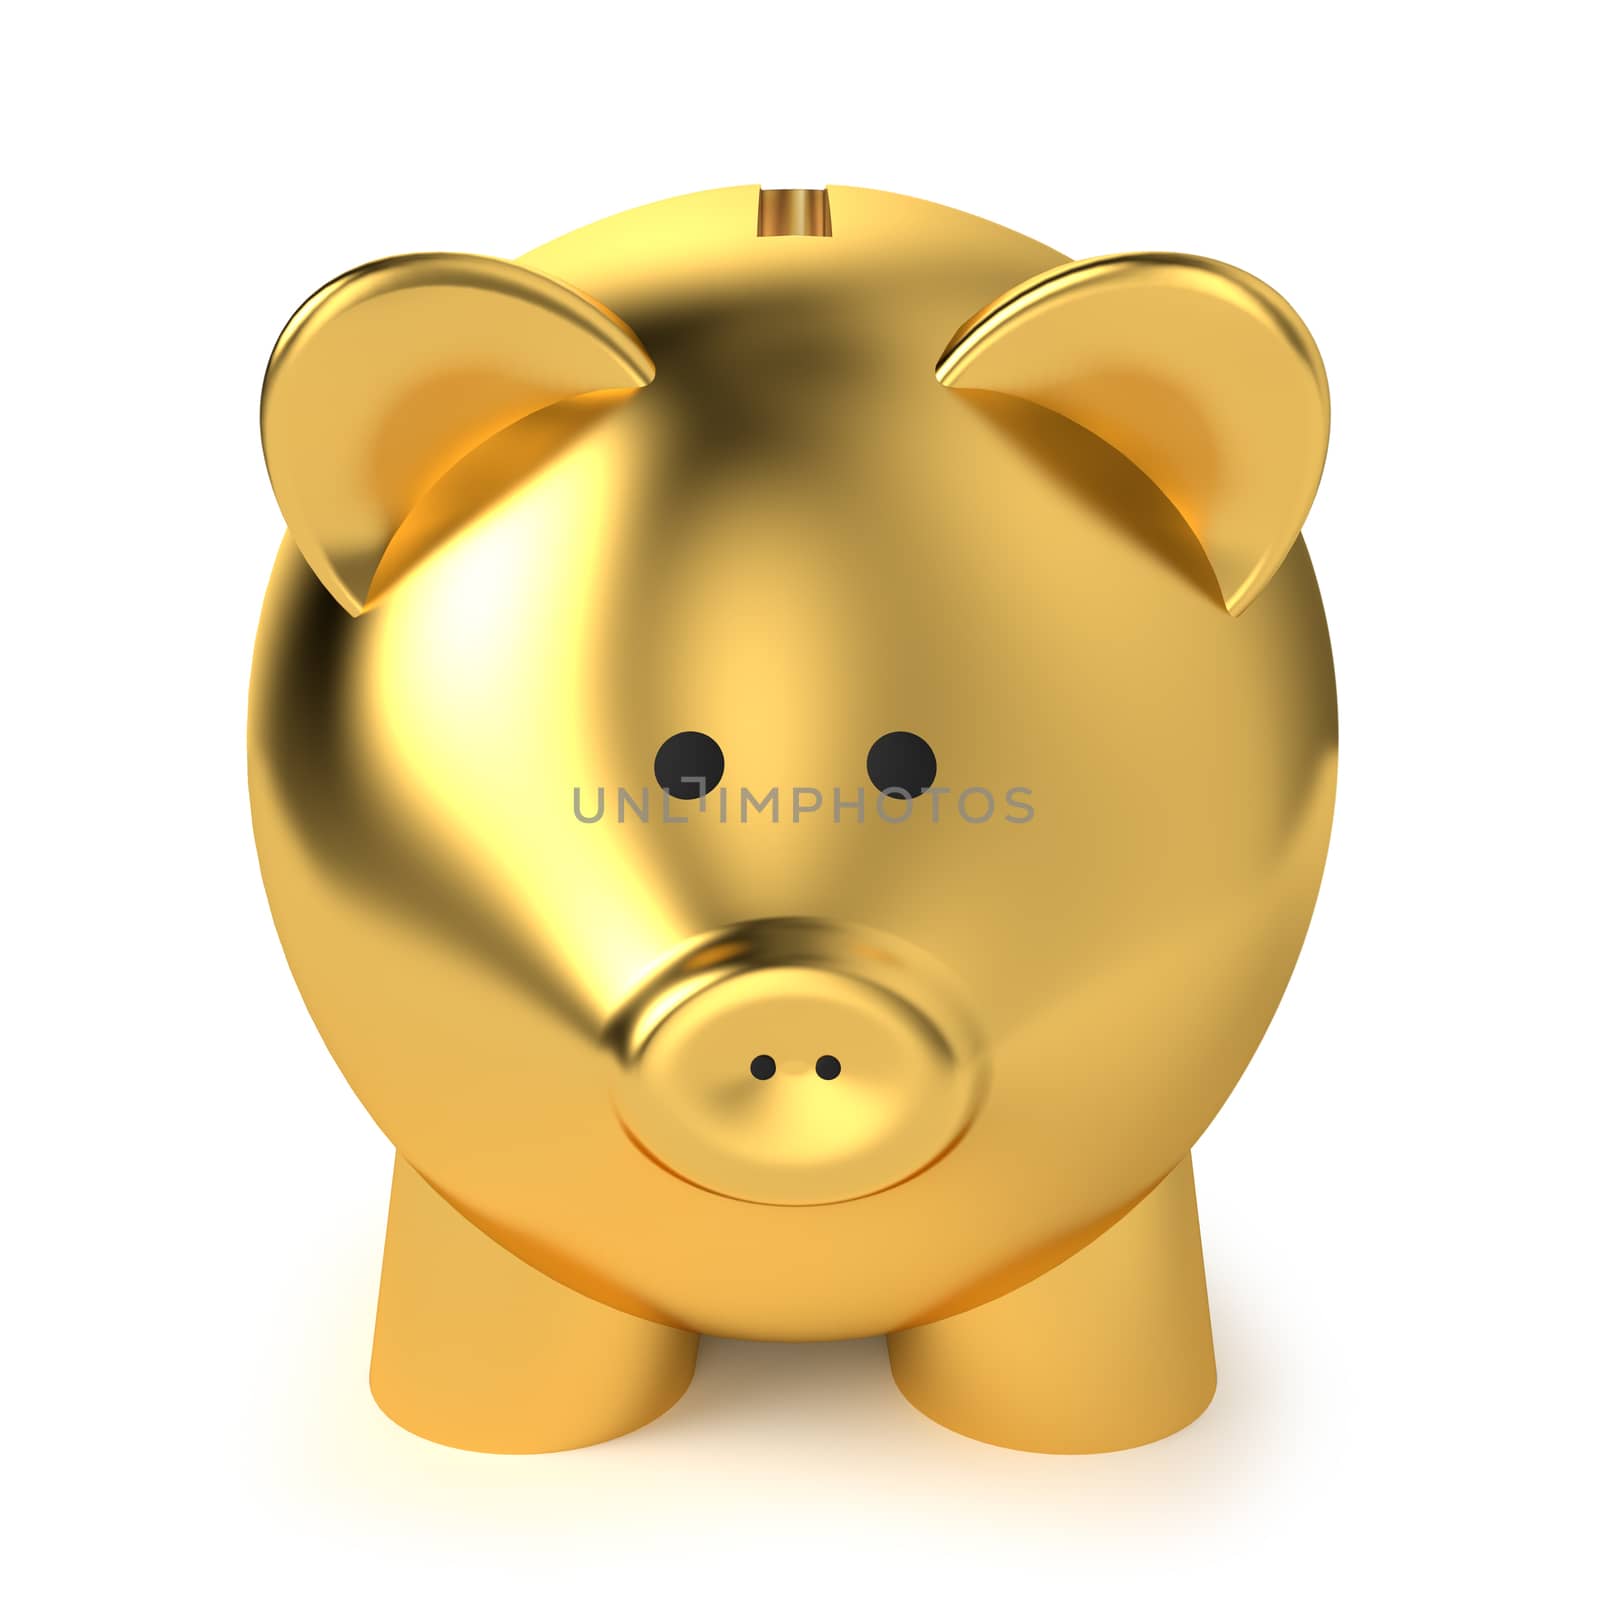 Financial, savings and business concept with a golden piggy bank or money box on white background.